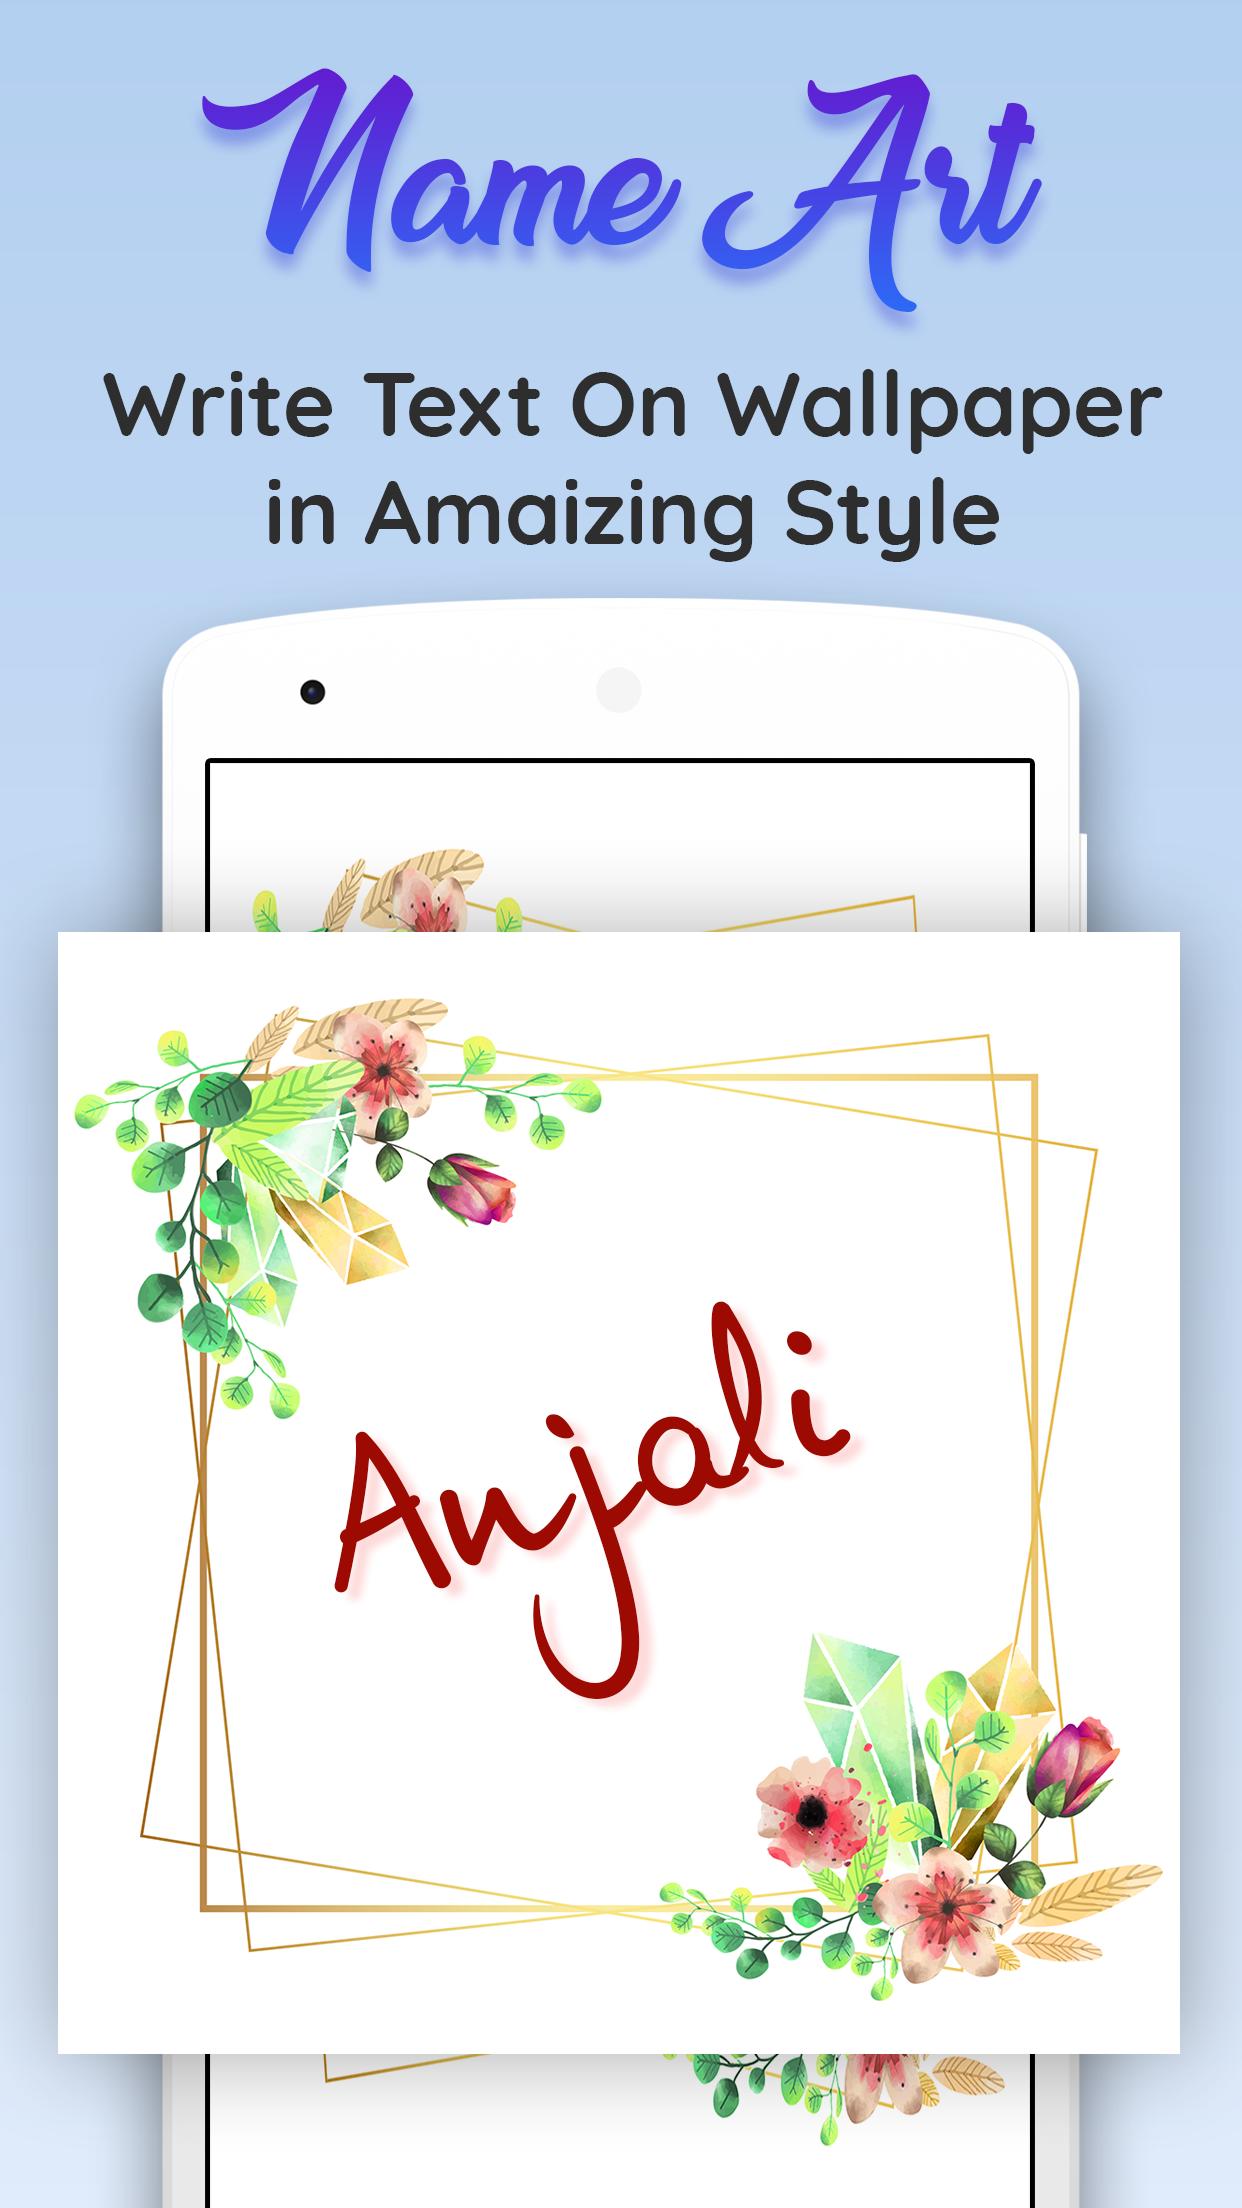 Name Art Photo Editor For Android Apk Download